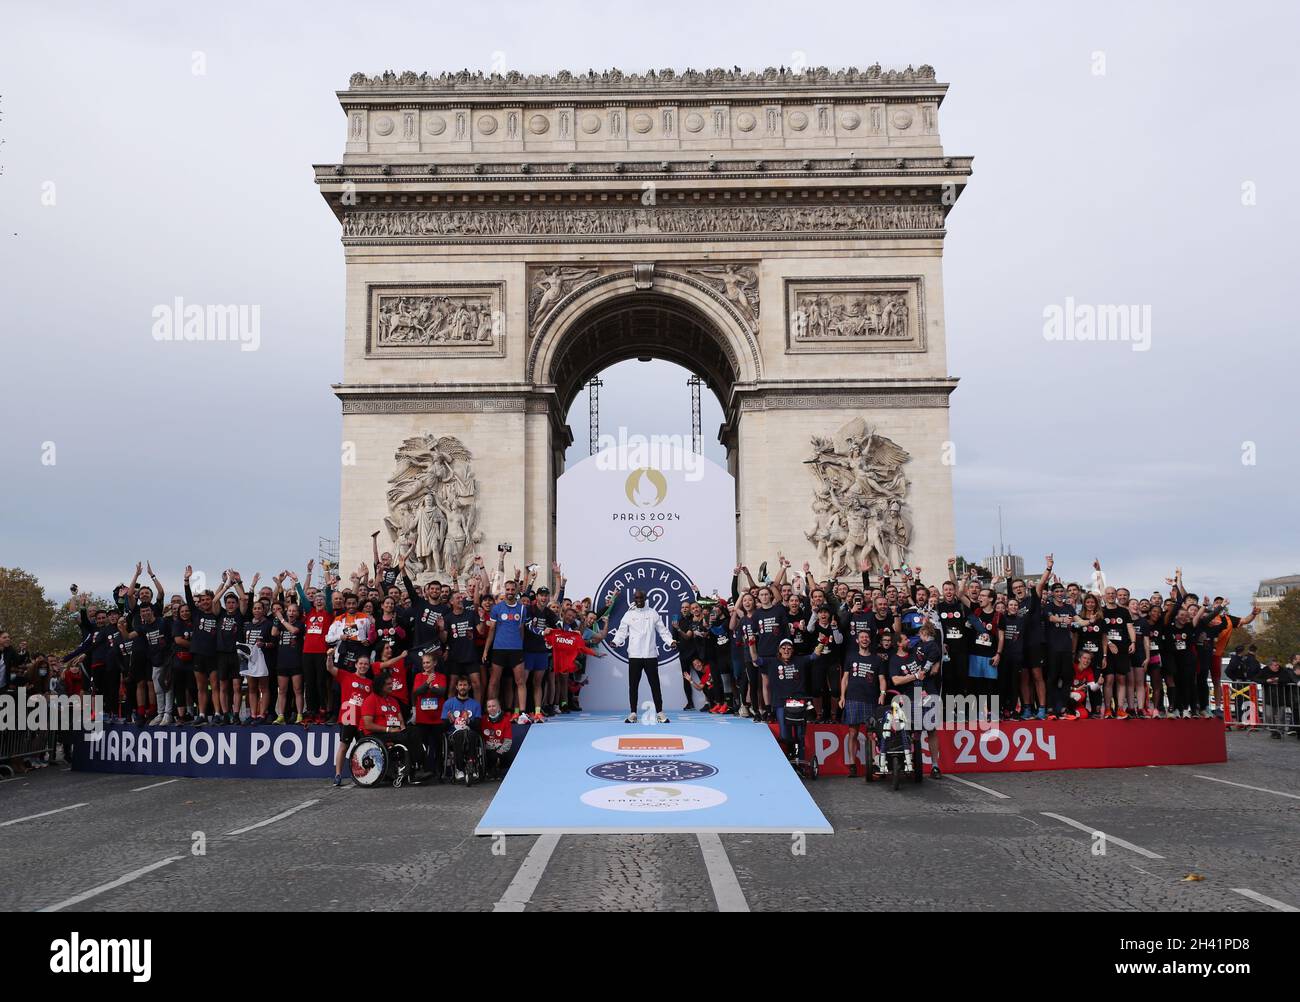 Paris, France. 31st Oct, 2021. Kenya's Eliud Kipchoge (C) poses with participants after the J-1000 Paris 2024 Marathon Pour Tous or Marathon For All, a 5km run along the Champs-Elysees marking the 1000 days countdown to the opening of Paris 2024 Olympic Games, in Paris, France, Oct. 31, 2021. Credit: Gao Jing/Xinhua/Alamy Live News Stock Photo